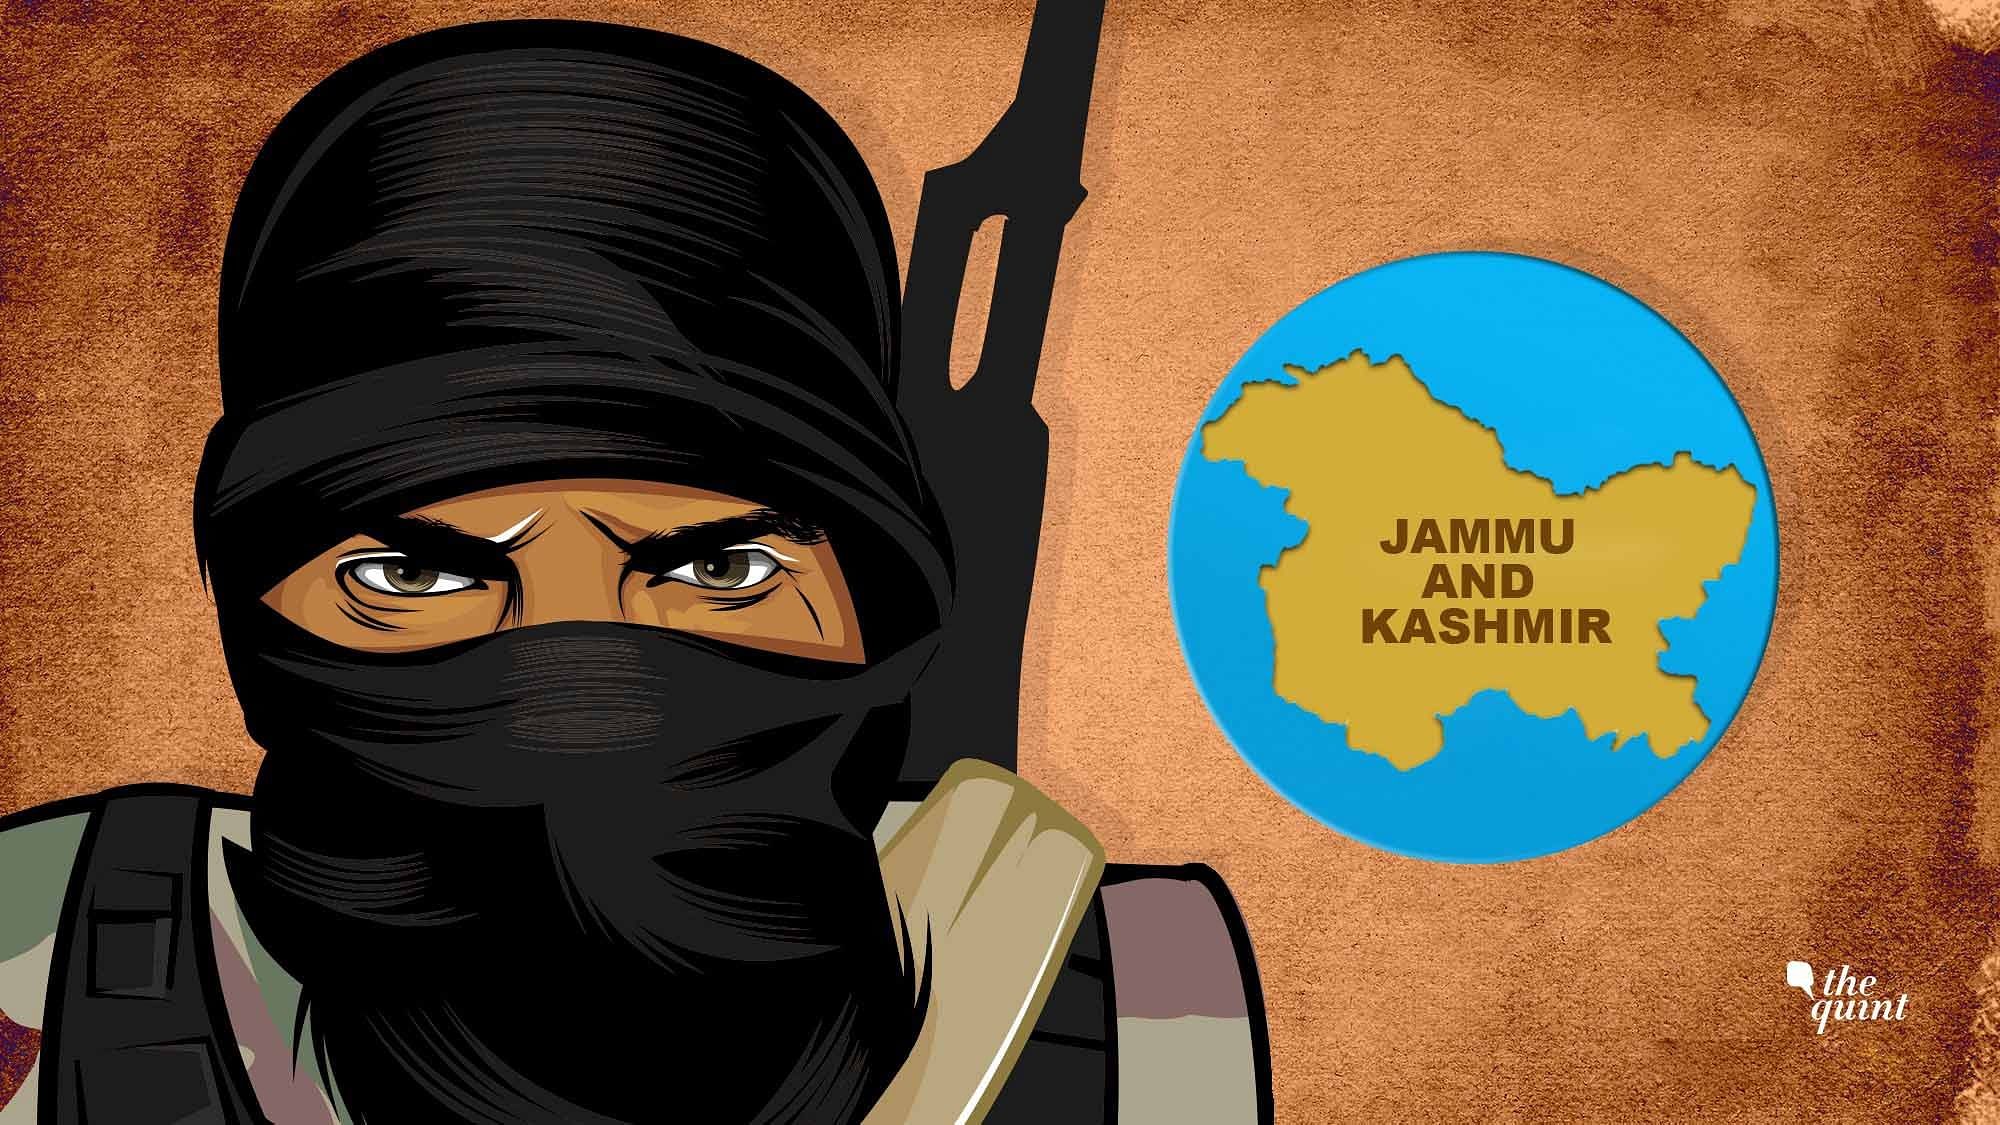 Sunrise of a new jihad: one linking the growing ranks of young Islamists inspired by al-Qaeda and the Islamic State with jihadist groups in Kashmir.